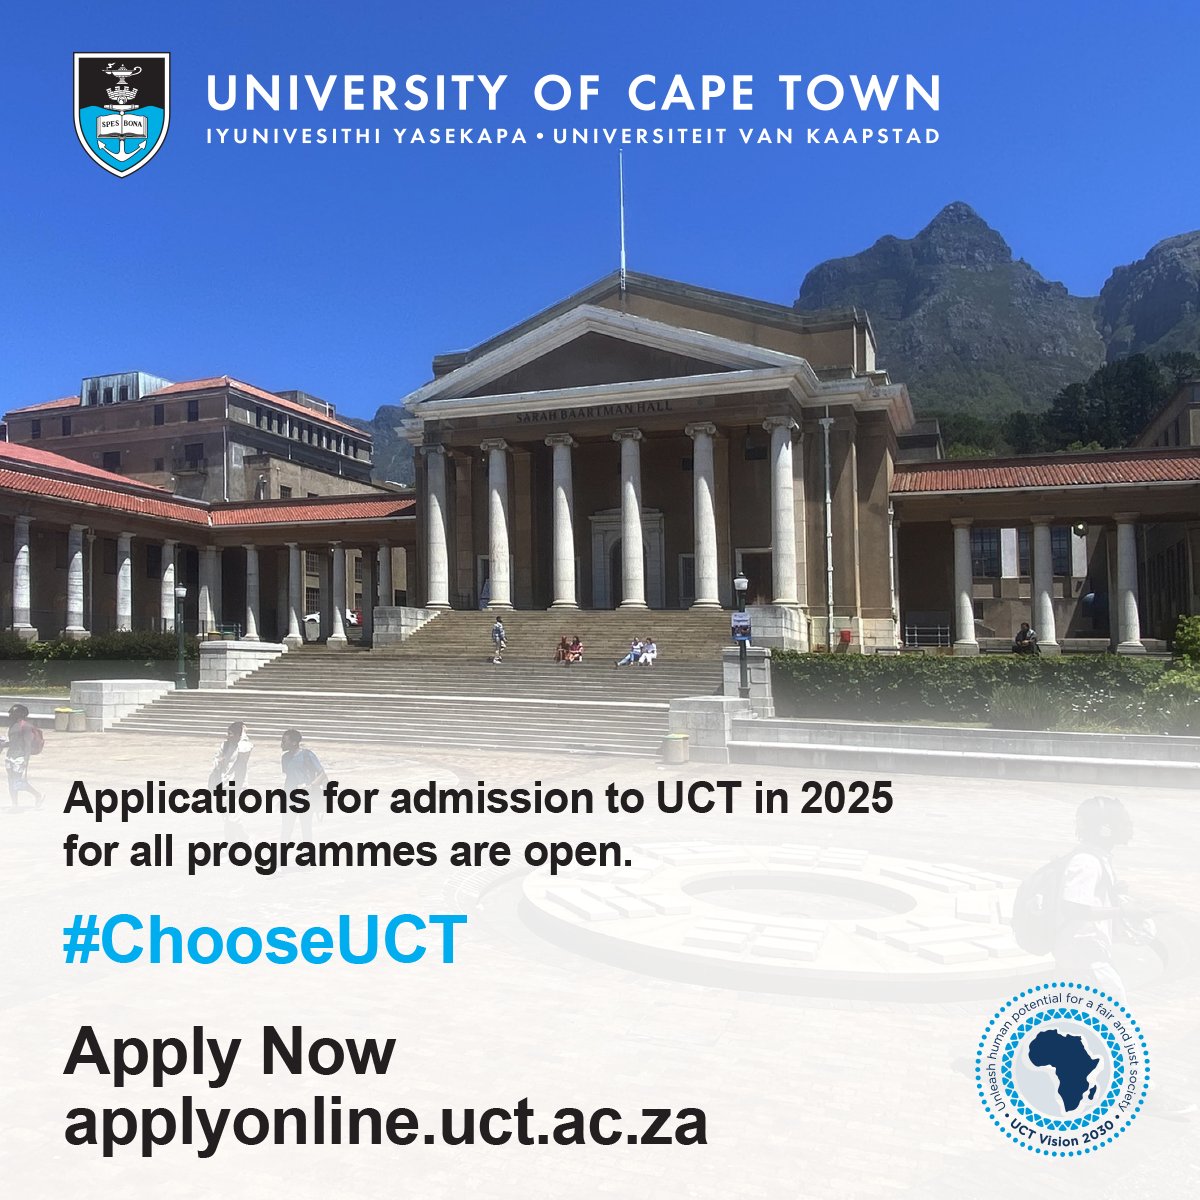 Applications for admission to study at UCT in 2025 are now open! Seize the opportunity to join Africa's leading university. Apply now: applyonline.uct.ac.za. #ChooseUCT